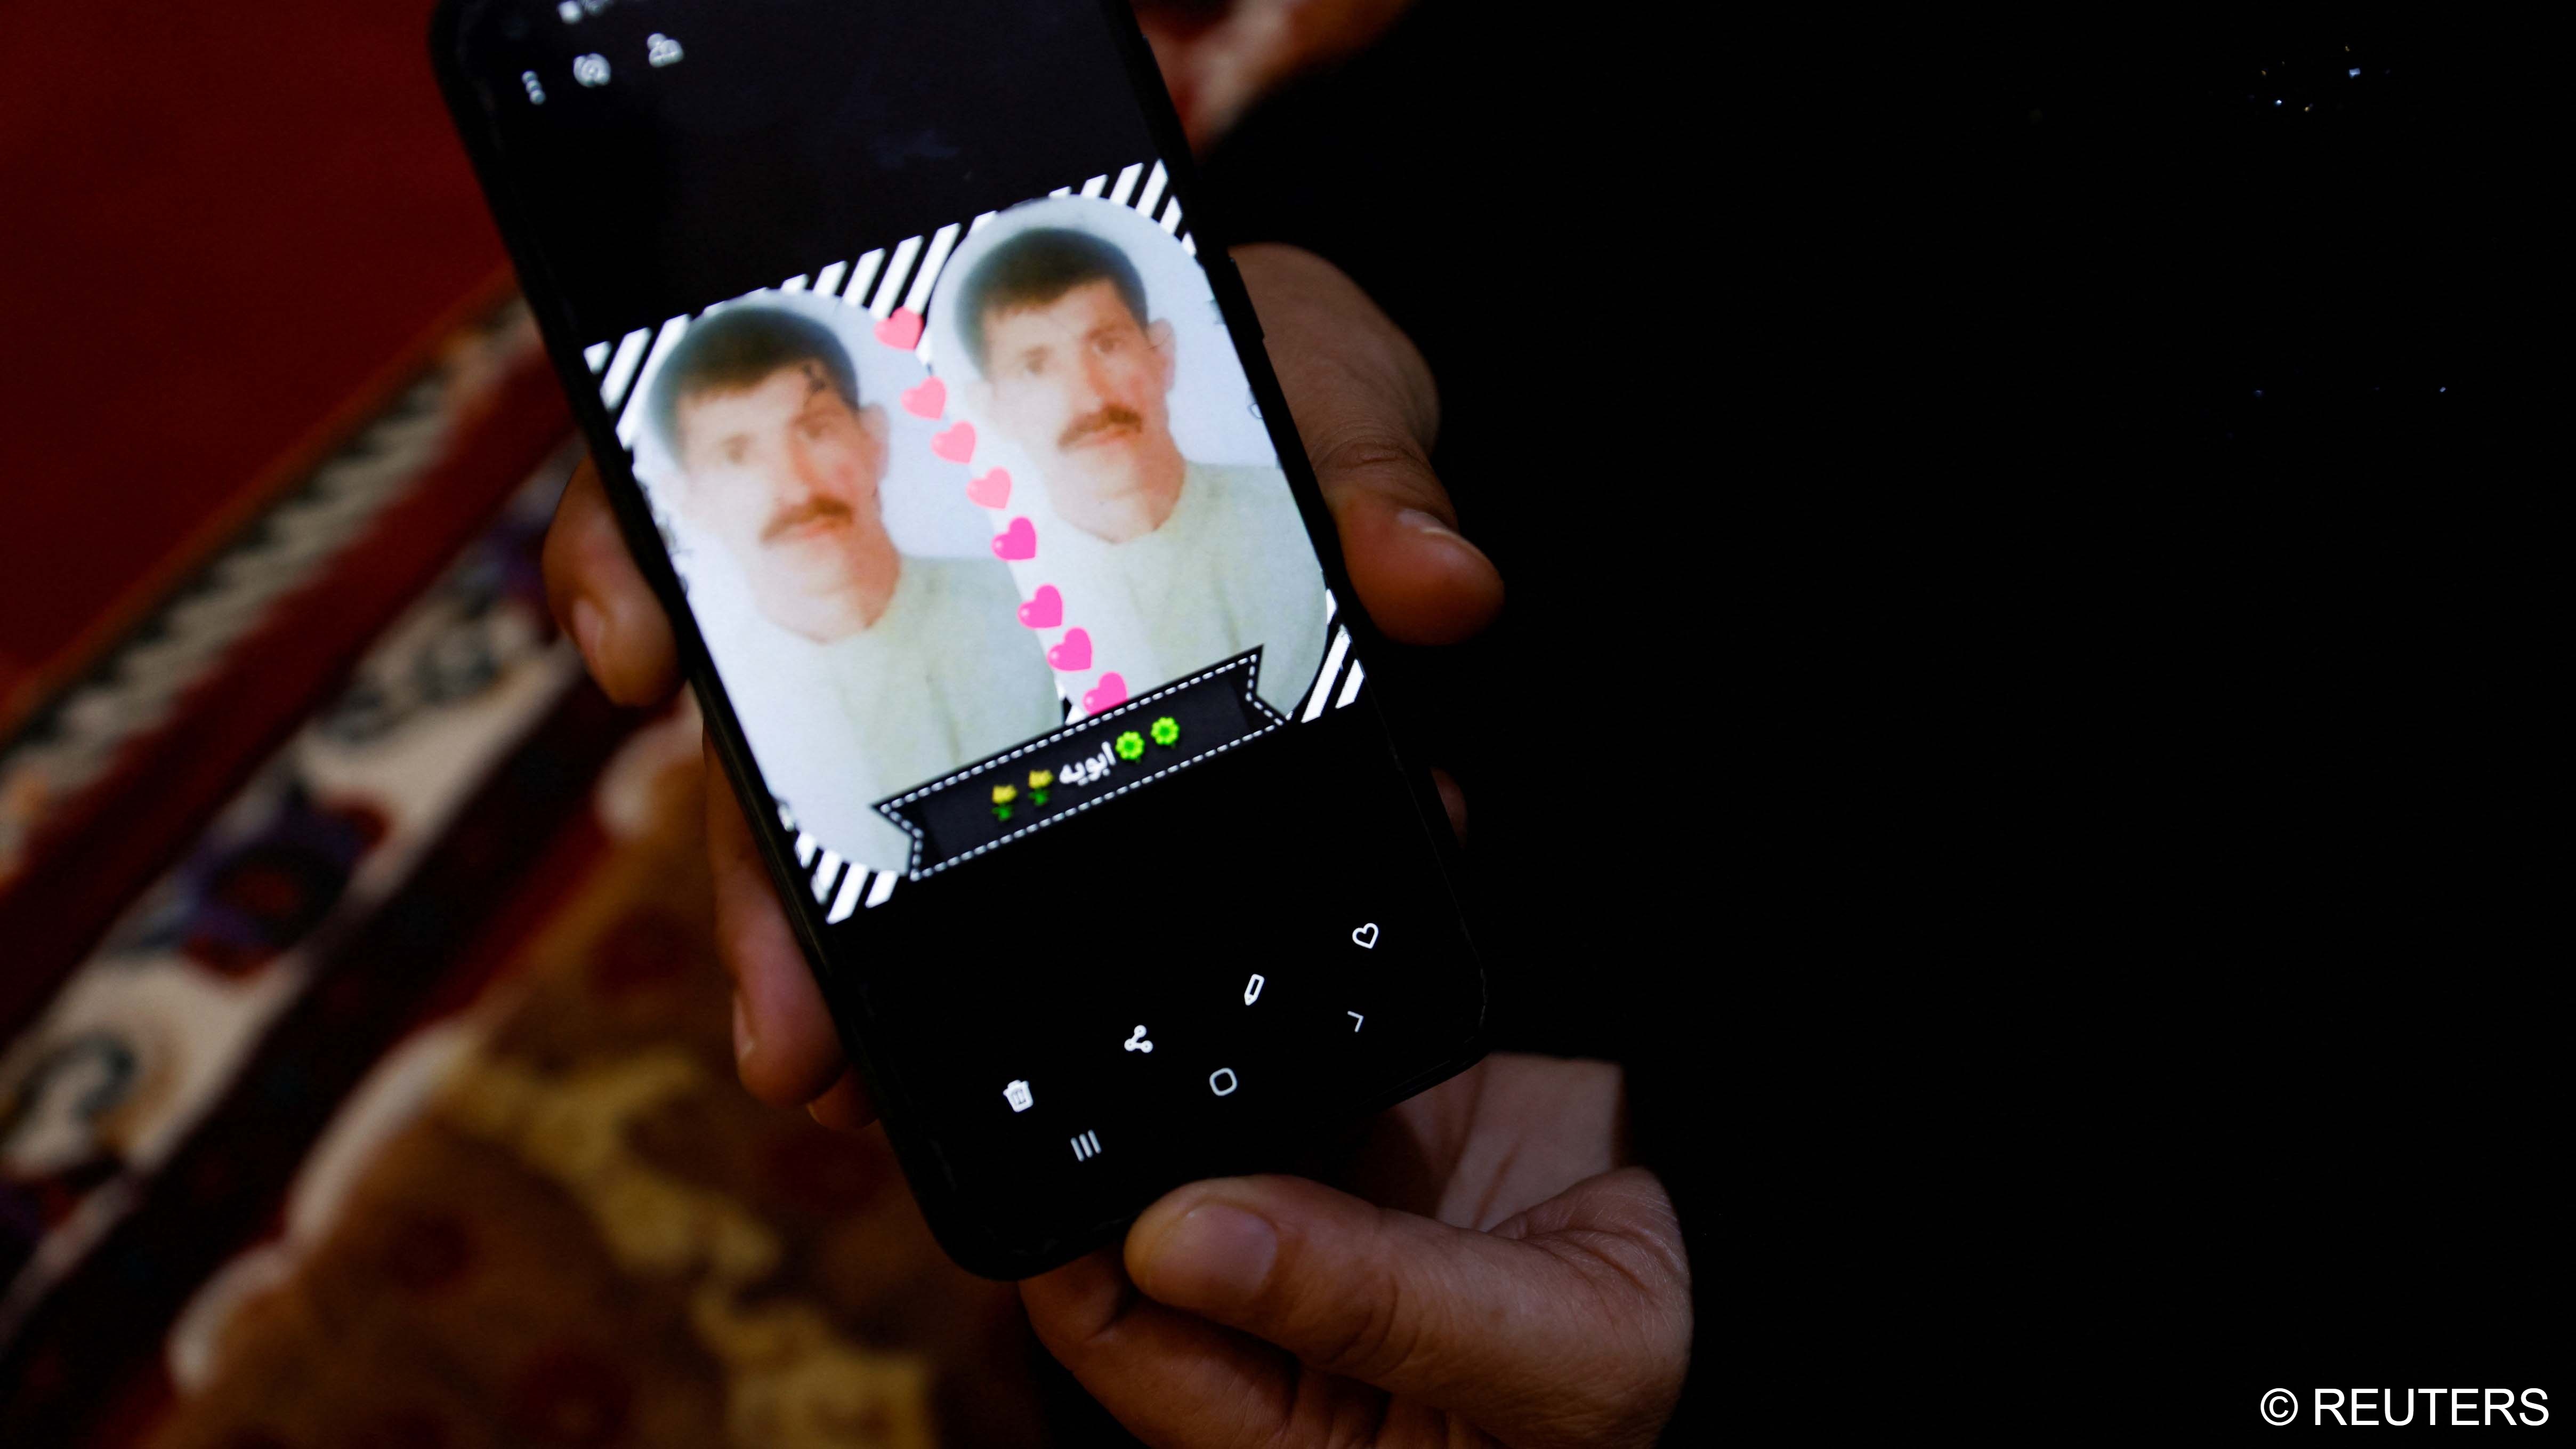 Ikhlas Talal, 43, shows a picture of her husband on the phone, who went missing as their area was liberated from Islamic State in 2016, in Saqlawiya, February 2023 (image: REUTERS/Saba Kareem)